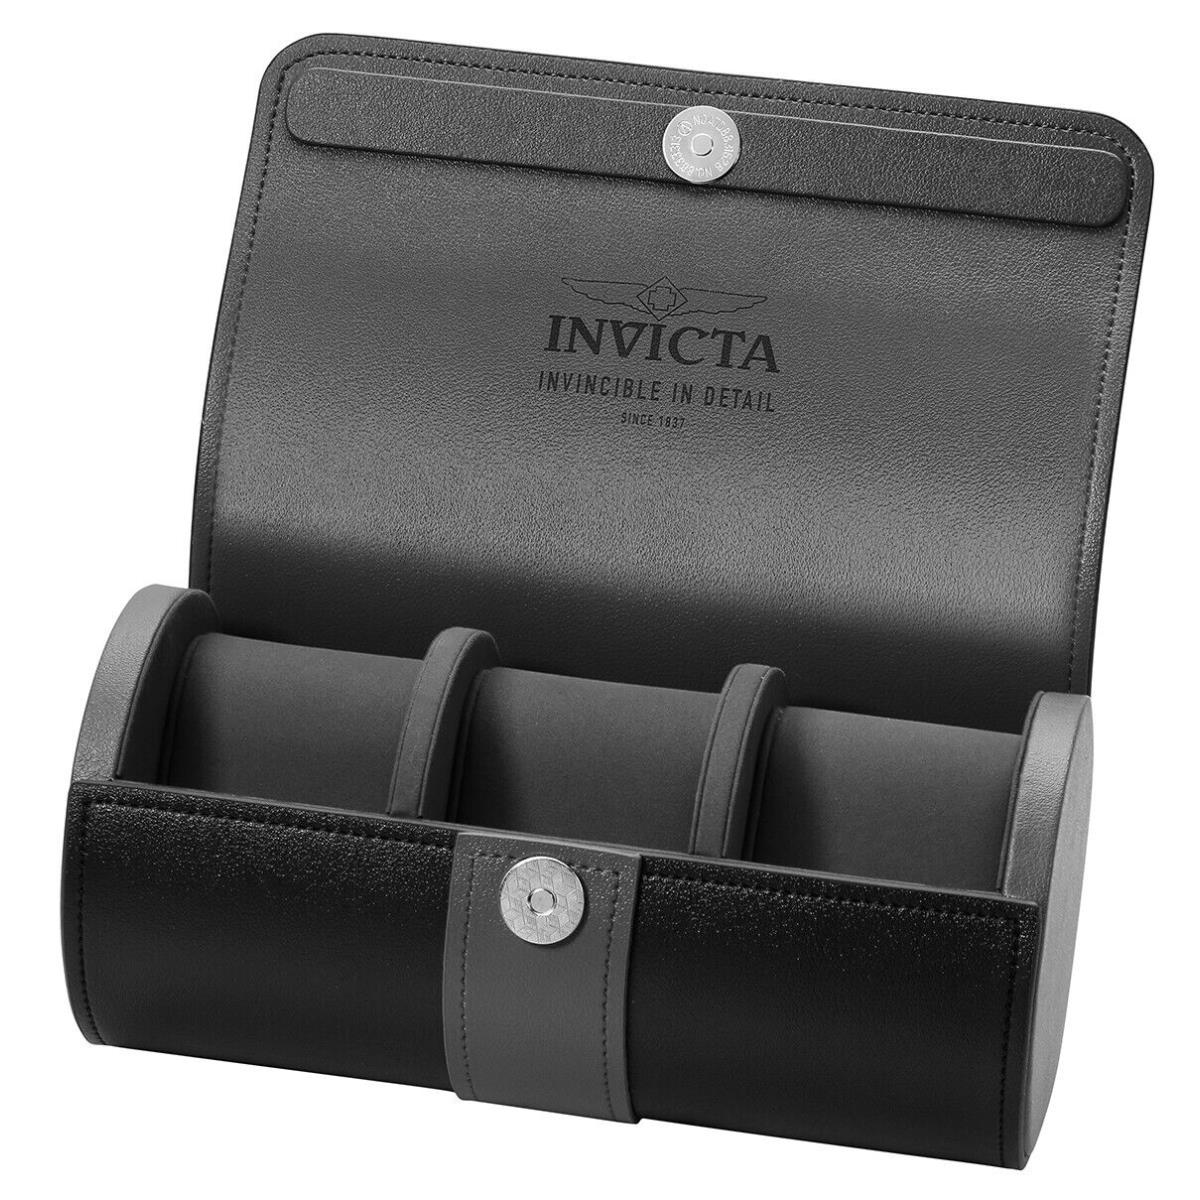 Invicta Unisex 3-Slot Black Watch Roll Travel Size Easy Carry Accessories 33924 - Black